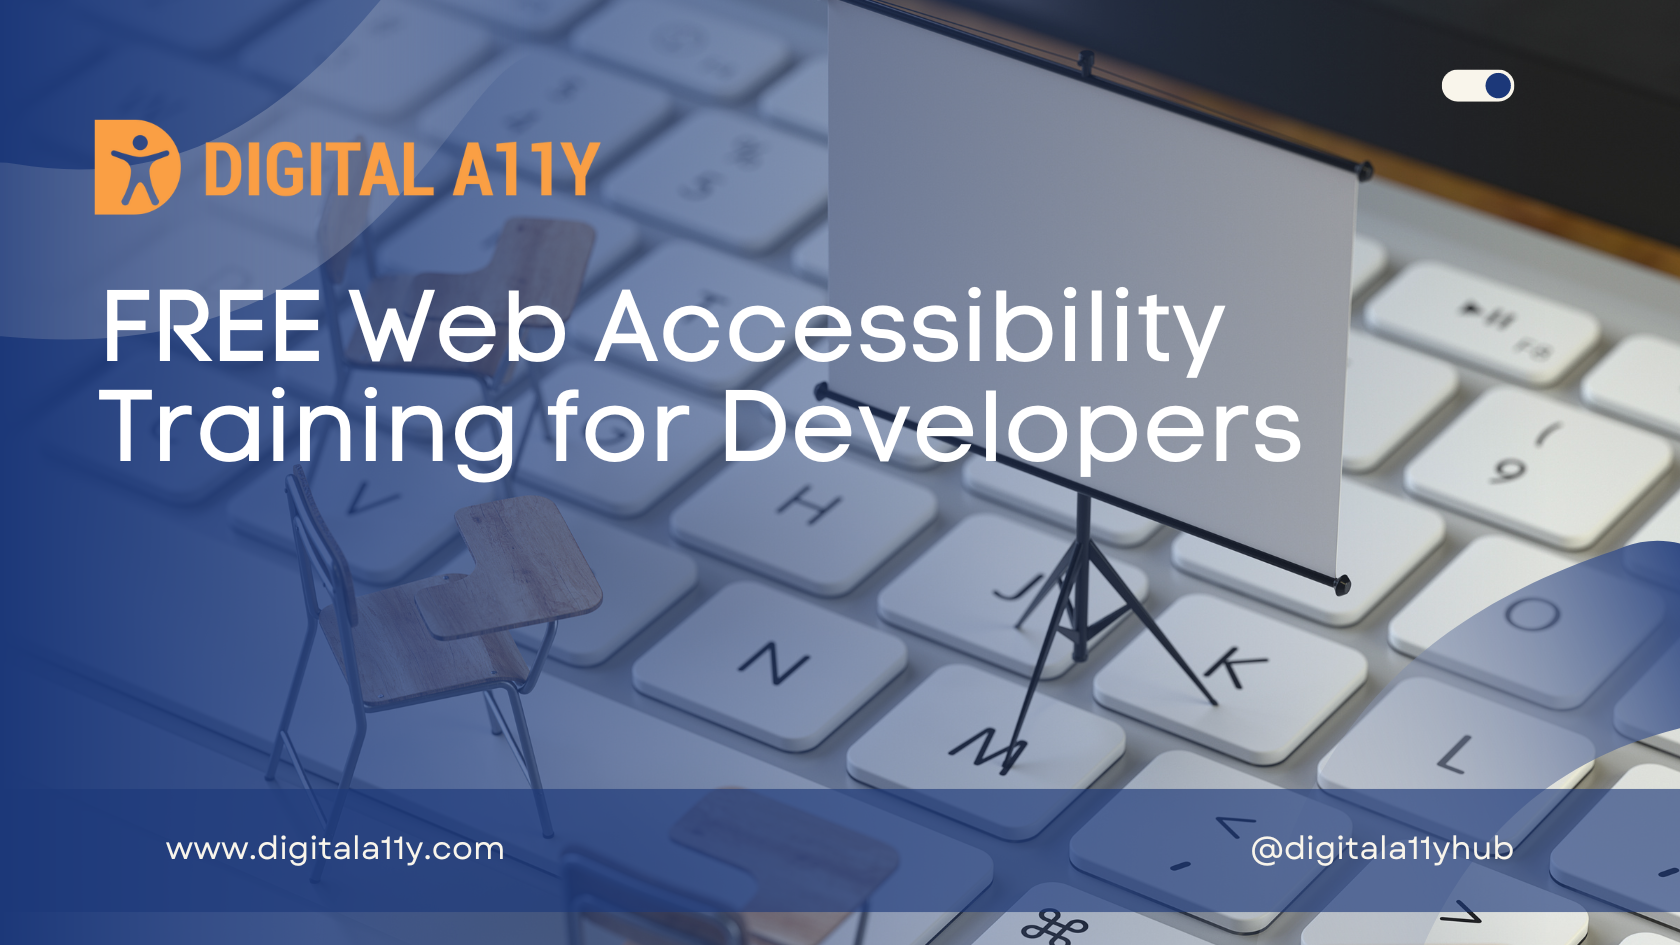 Registration now open for FREE Web Accessibility Training for Developers